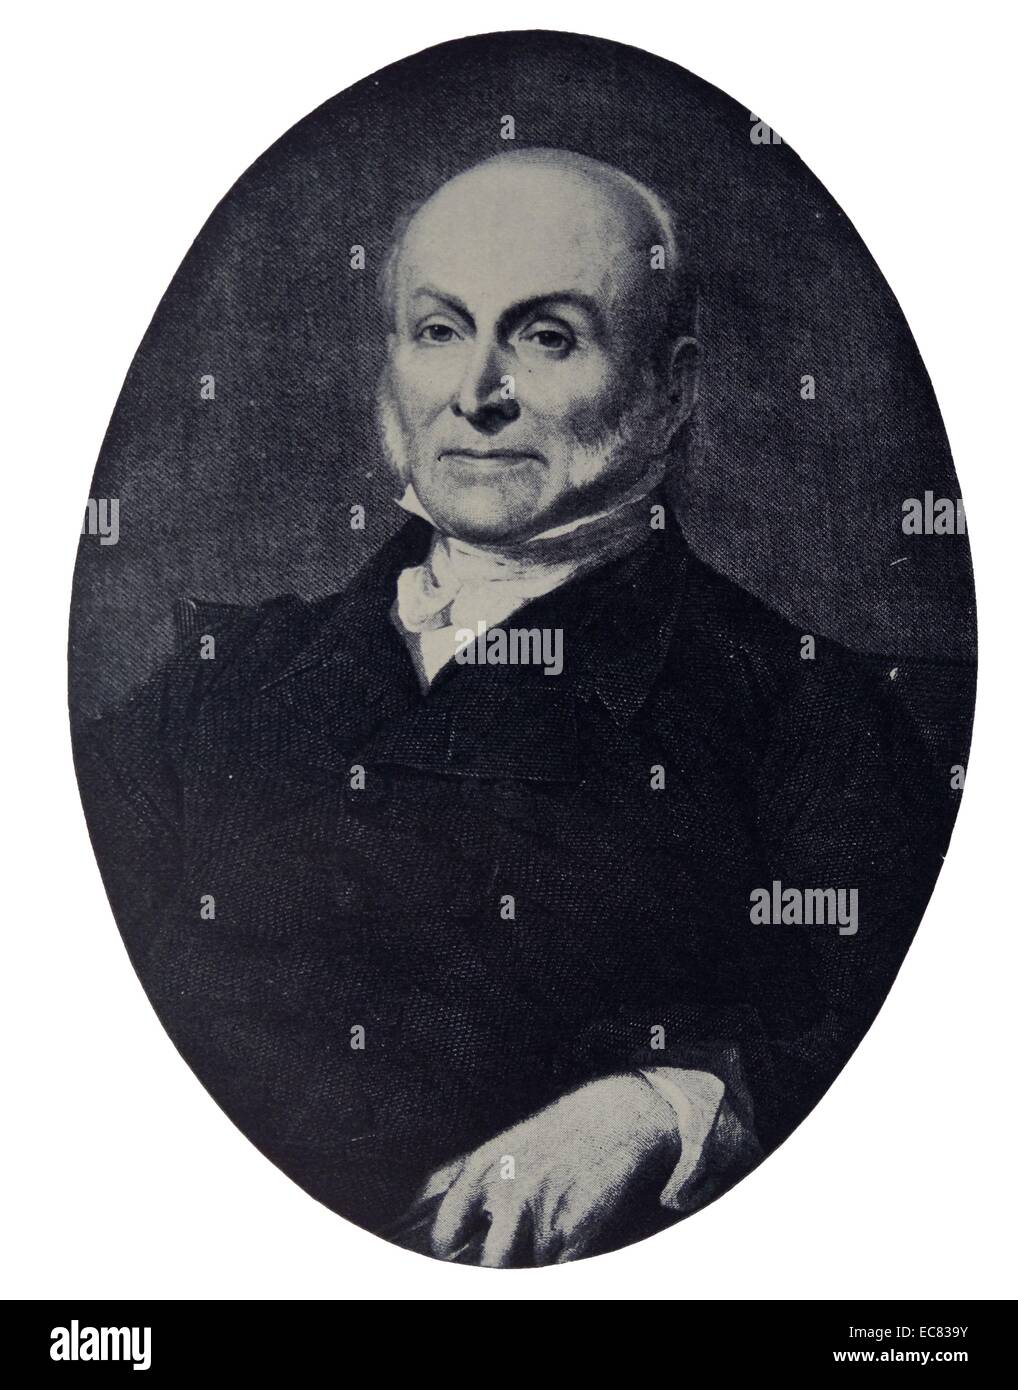 Portrait of John Quincy Adams (1767-1848) American statesman who served as the sixth President of the United States. He also served as a diplomat, a Senator and member of the House of Representatives. Dated 1829 Stock Photo